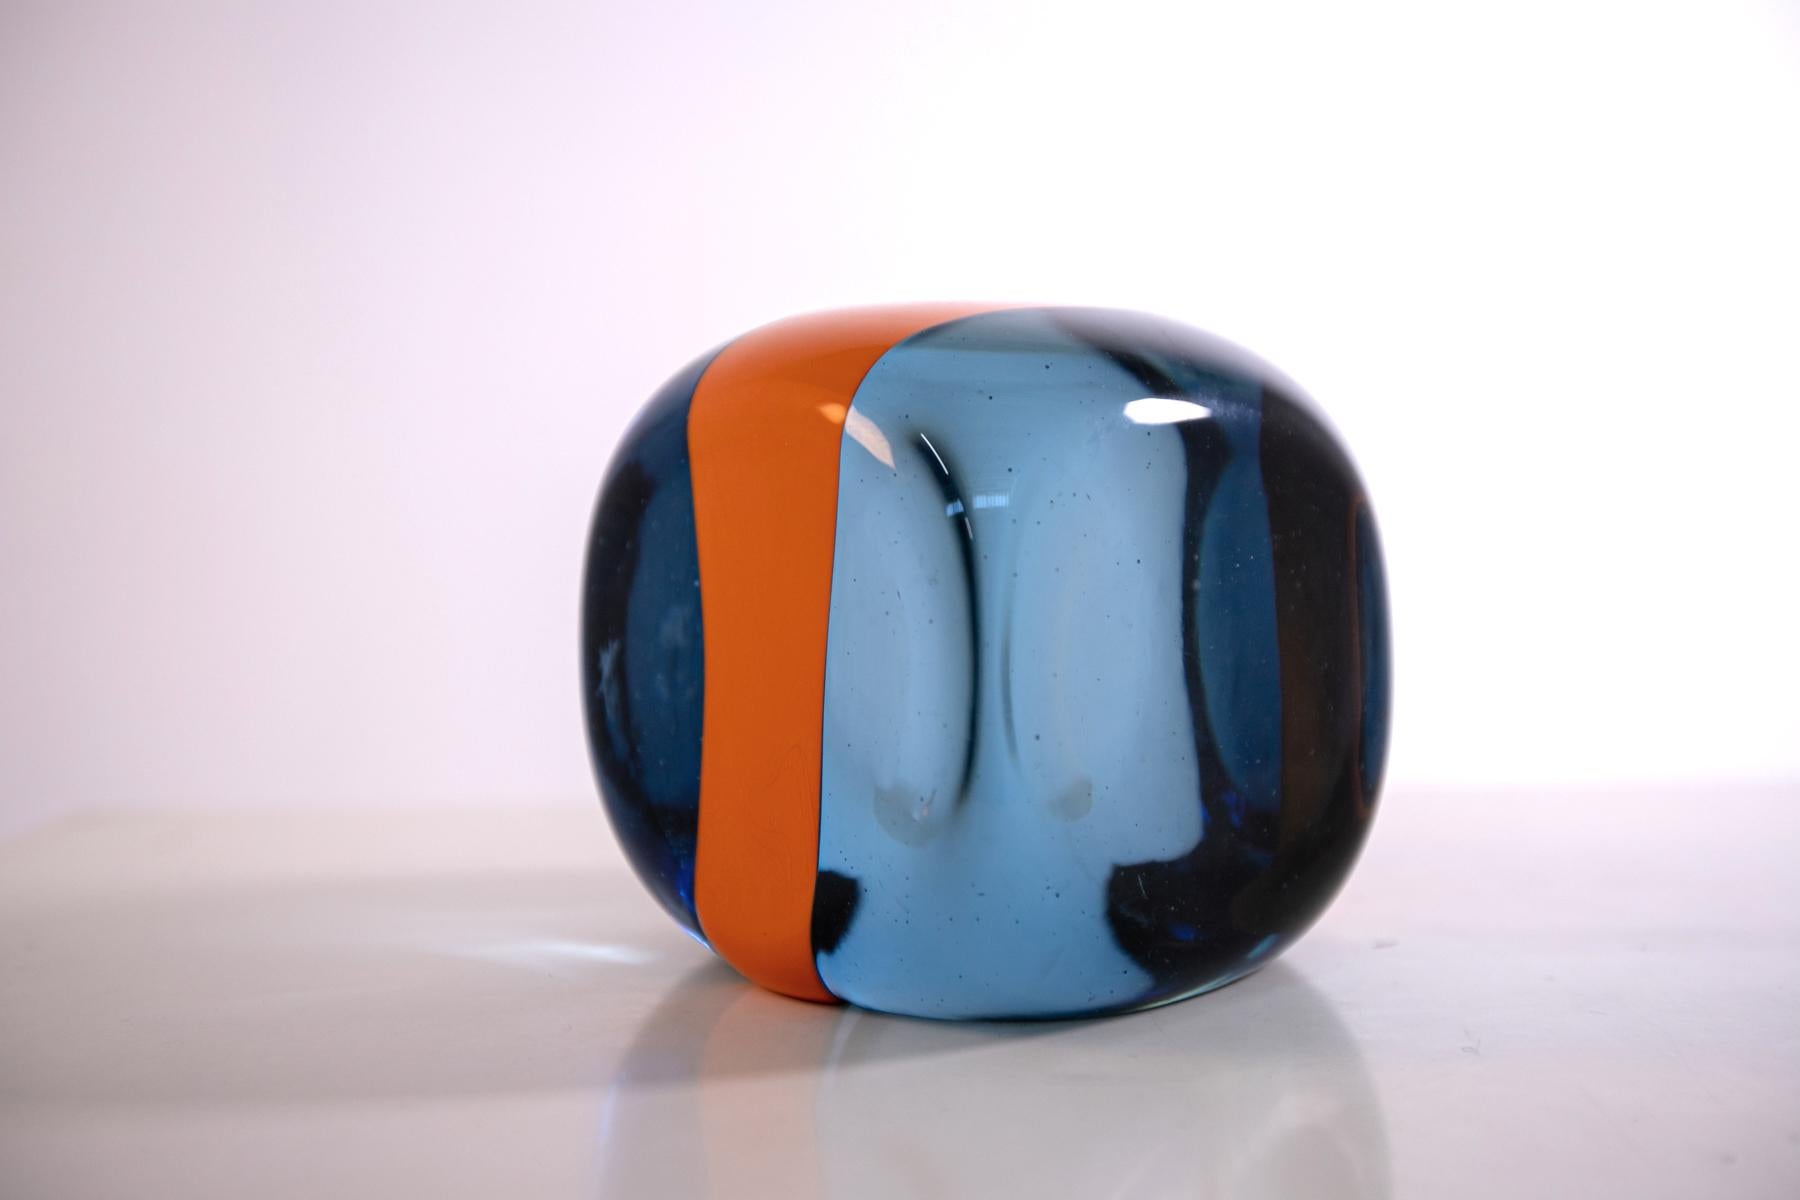 Decorative cube by Venini signed Pierre Cardin, 1970s.
Elegant decorative object made by Venini, Italy. The cube is signed at the base by the great designer Pierre Cardin from the late 1970s early 1980s. The square shaped glass has beveled sides.